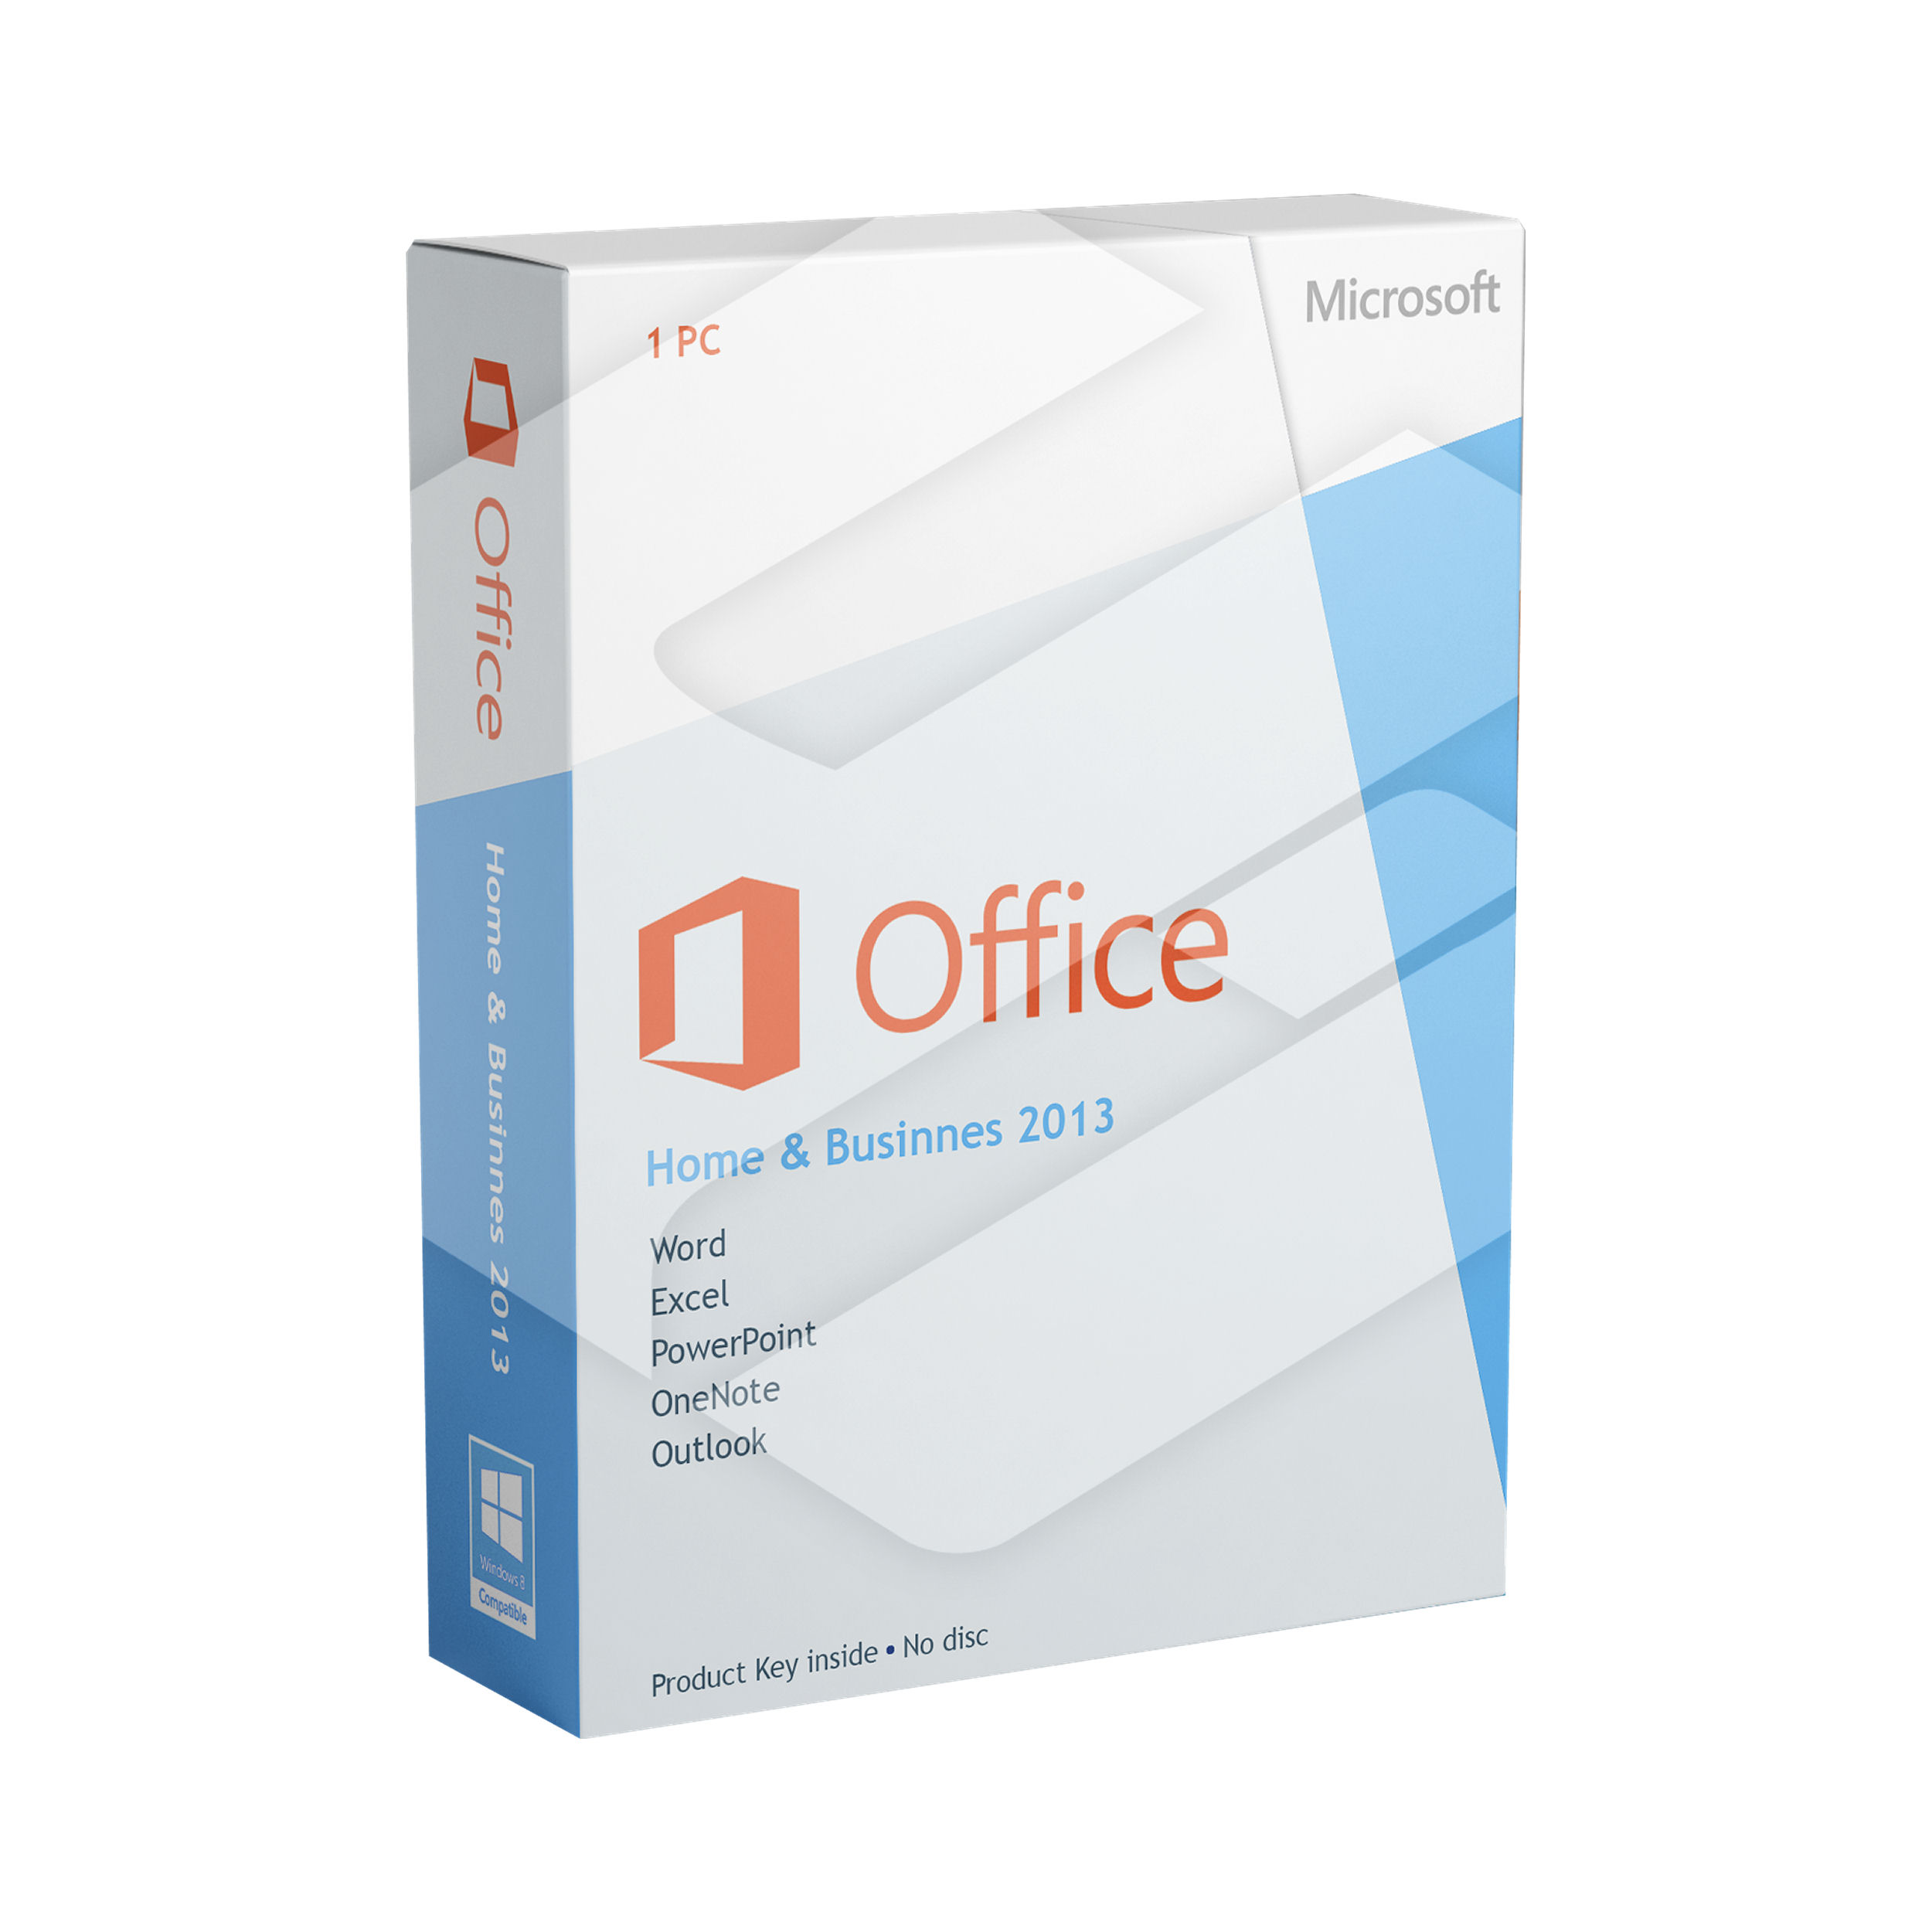 Mentor clumsy Typical Microsoft Office 2013 Home & Business | SW10029